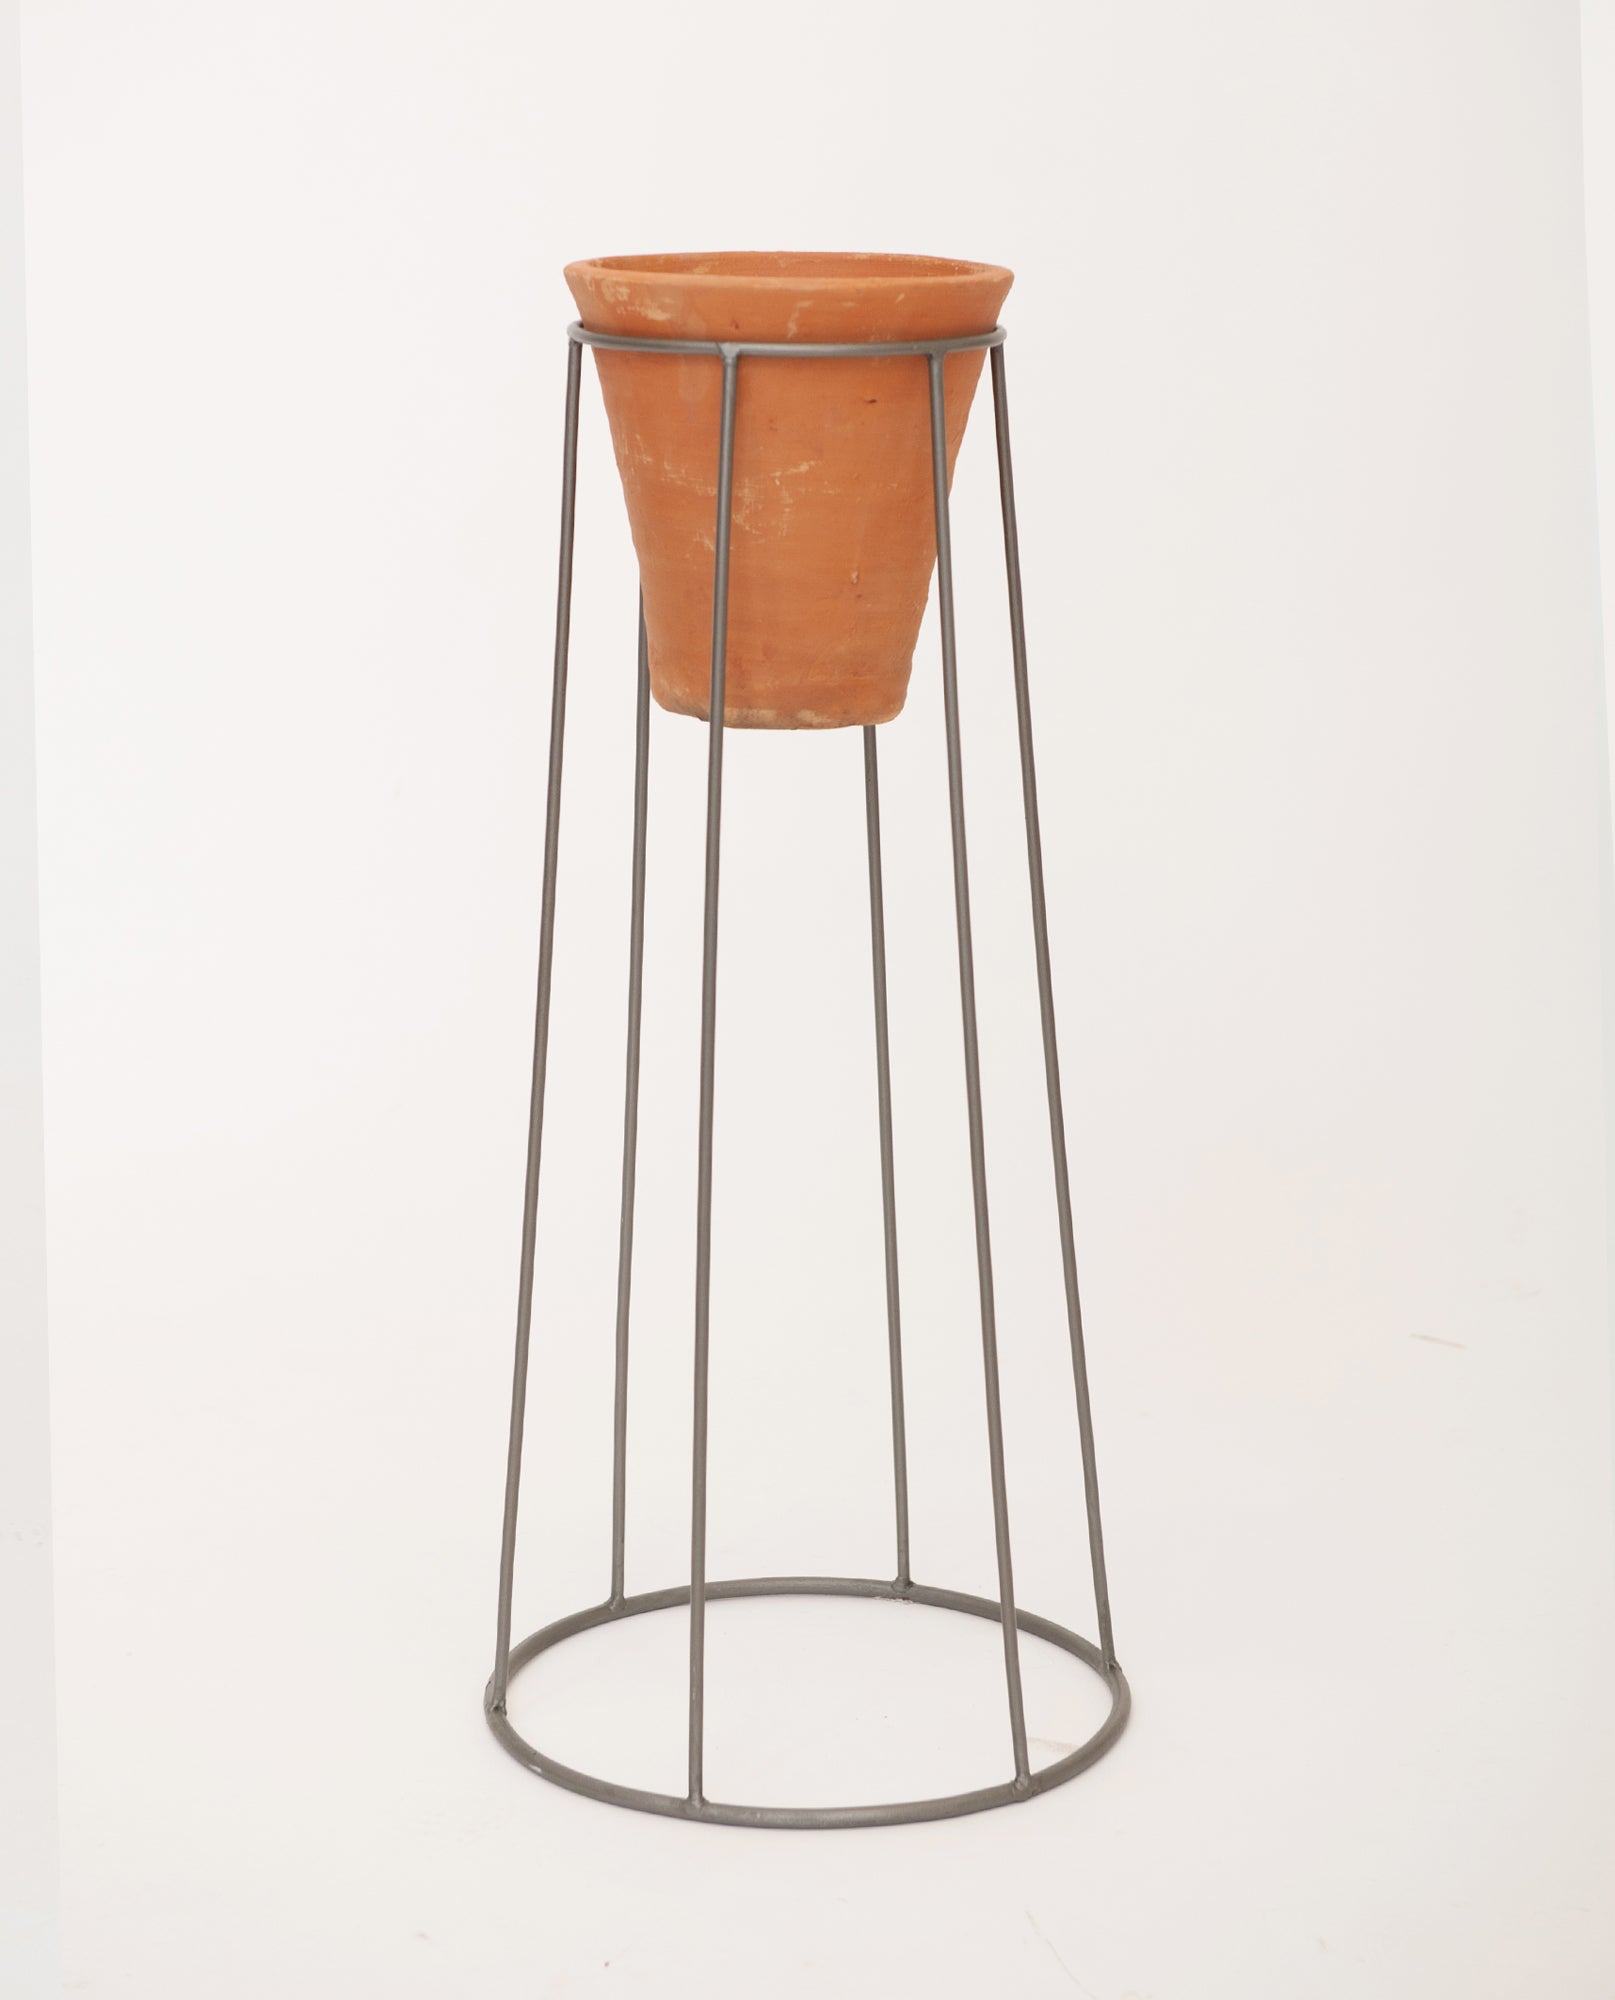 Chrome Plant Stand With Terracotta Pot